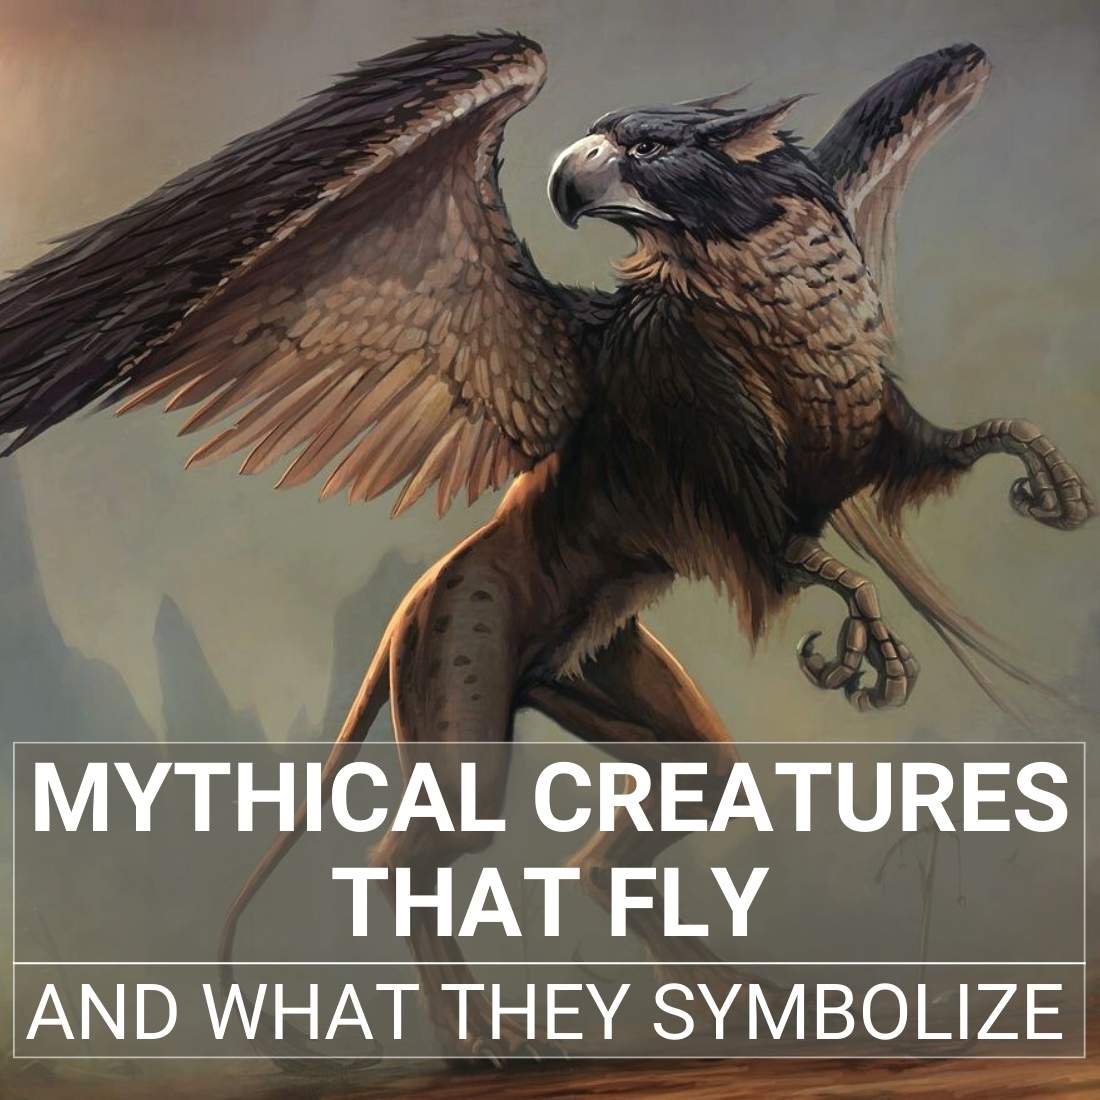 Mythical creatures that fly